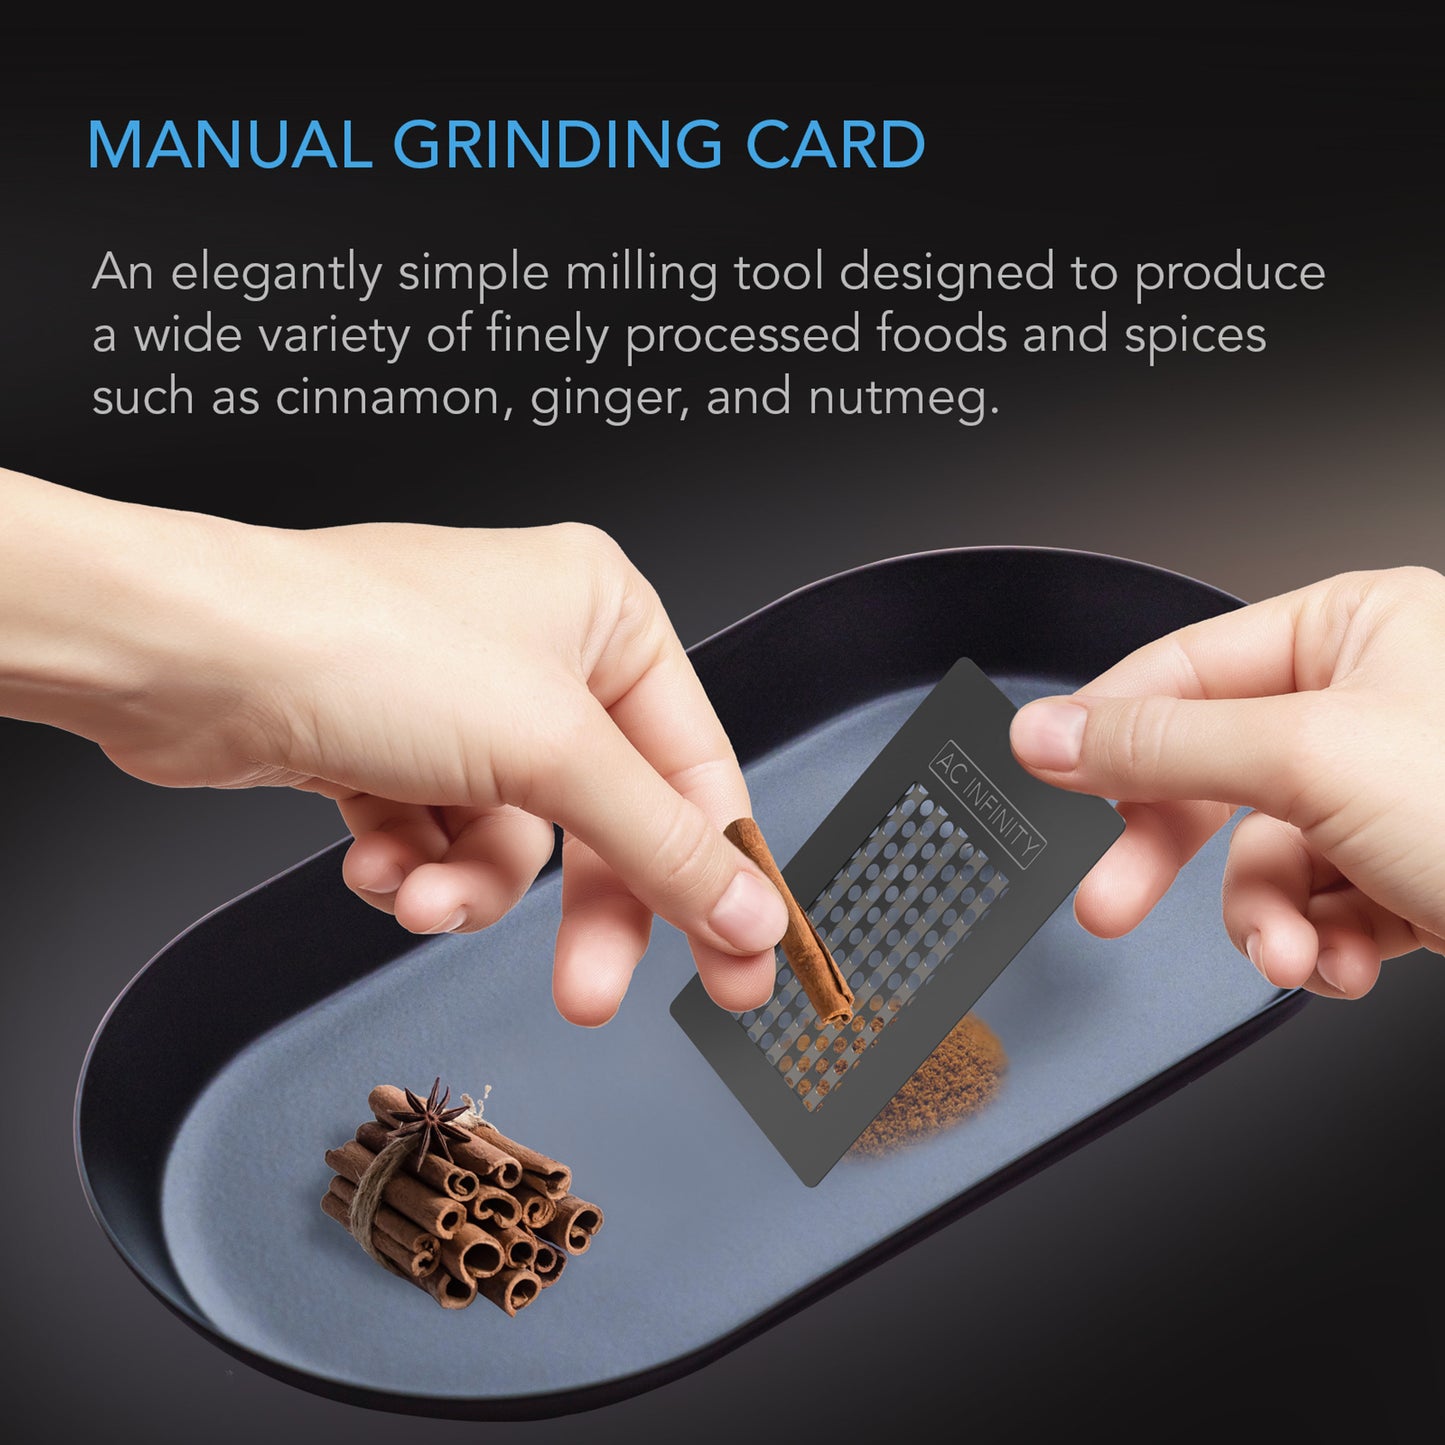 AC Infinity Grinder Card (Milling Tool W/ Protective Sleeve)